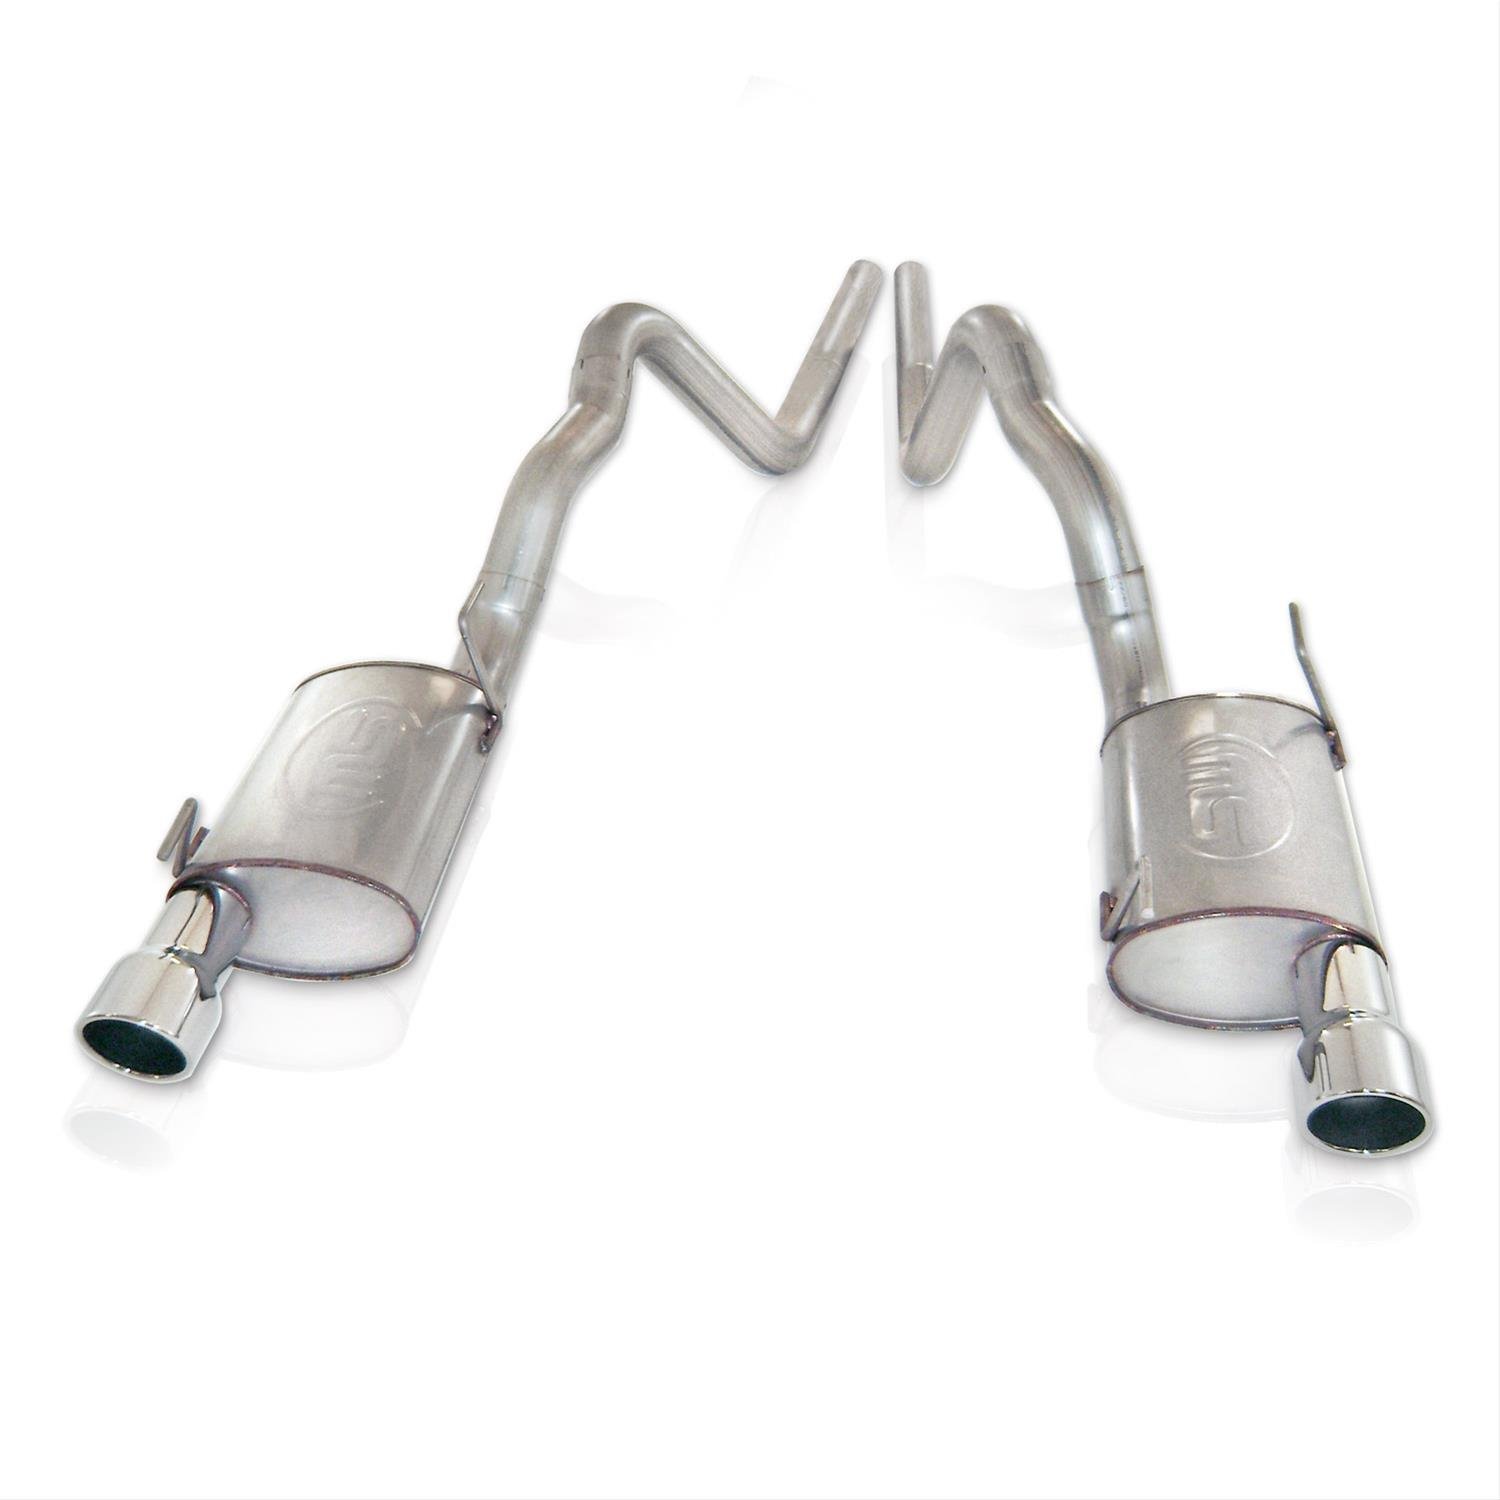 2007-2010 Shelby GT500 3 Catback exhaust system. Includes 2 2.5 core s-tube turbo mufflers 2 4 mirro